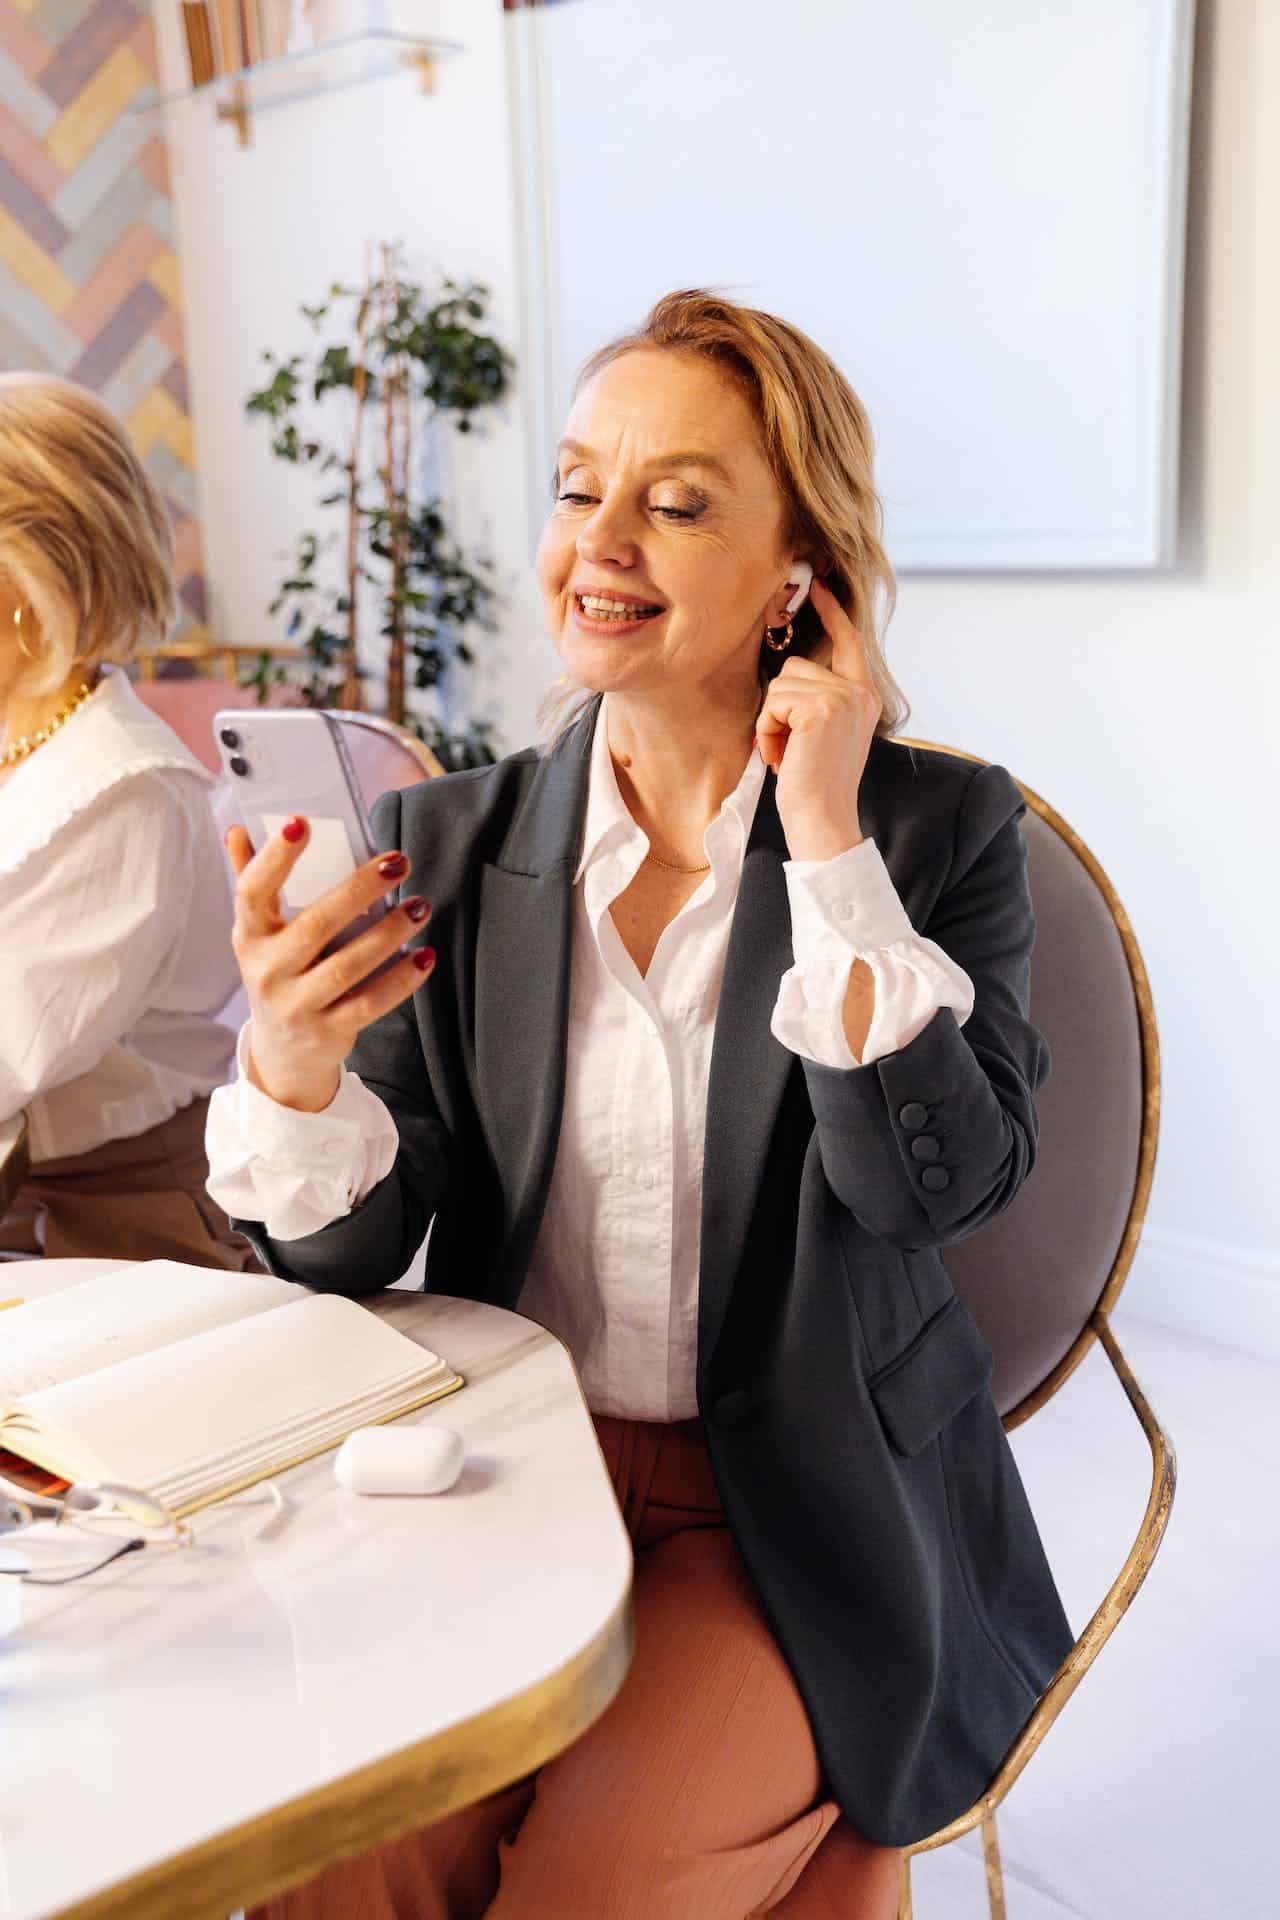 Woman on cell phone in professional attire